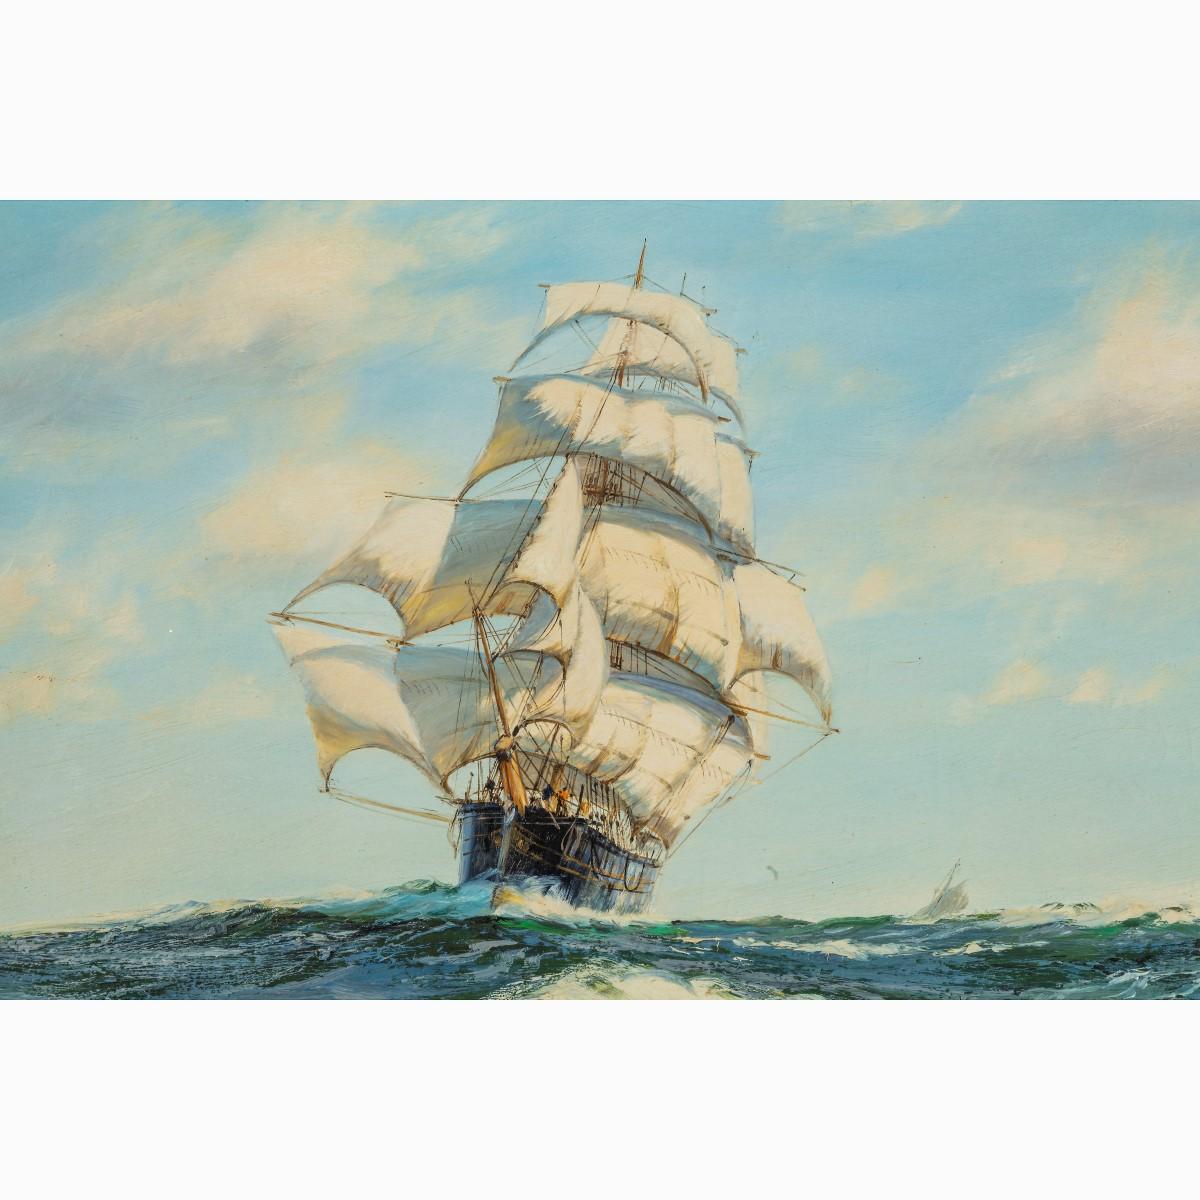 ‘Silver Seas’ by Henry Scott, (1911-2005) this oil on canvas shows the famous clipper ‘Blue Jacket’ running before the wind on white tipped waves, inscribed on the stretcher “The famous clipper Blue Jacket (1790 tonnes) built by Jackson of East